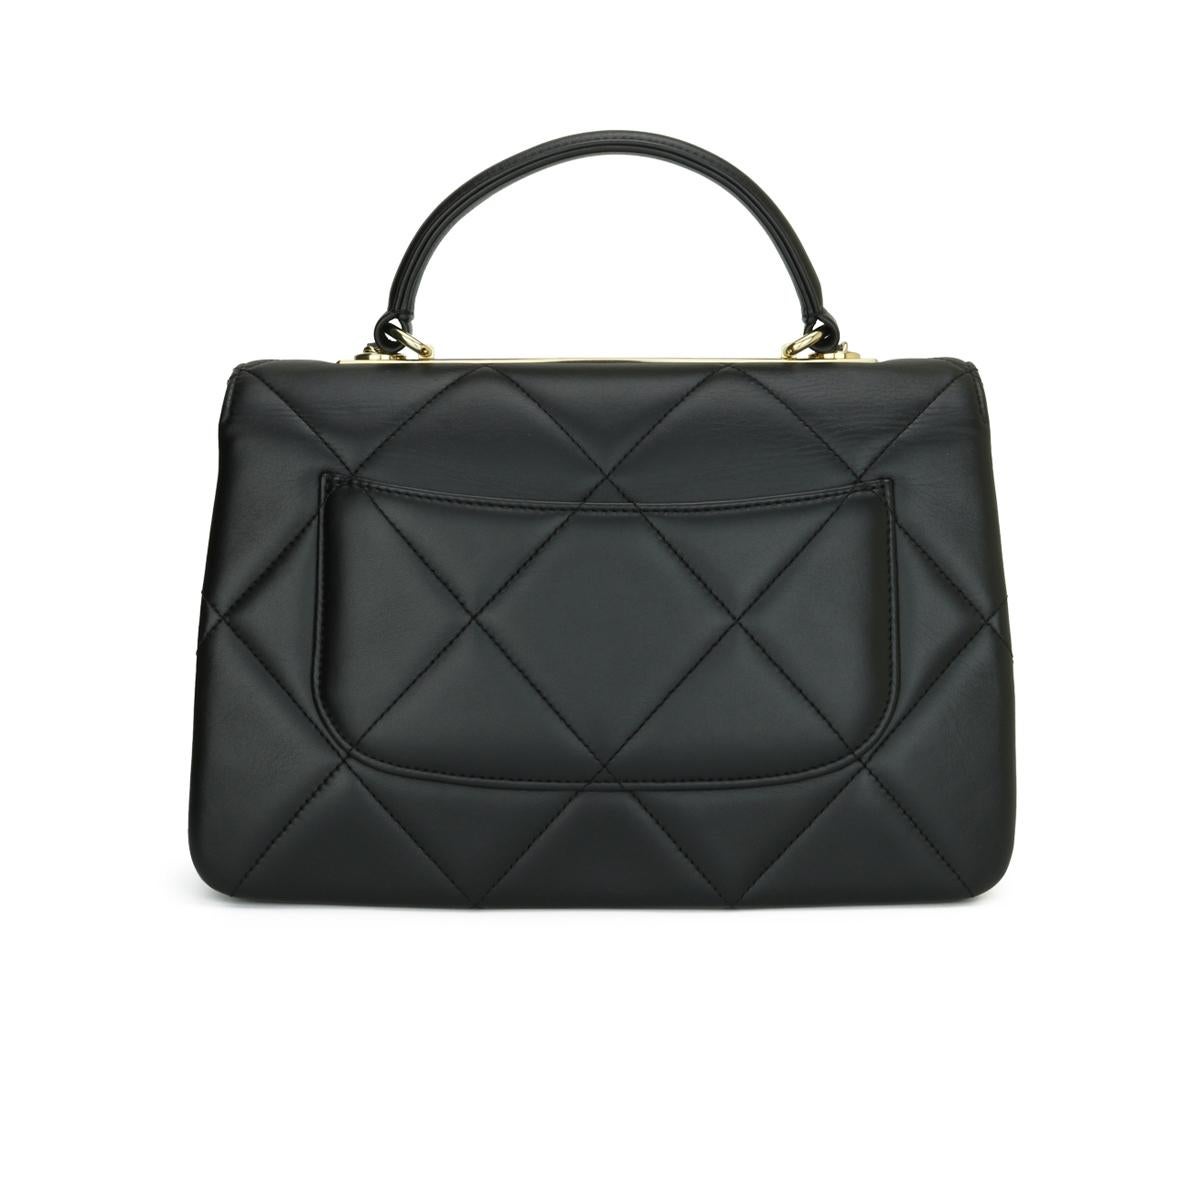 CHANEL Trendy CC Top Handle Bag Medium Black Quilted Lambskin with Light Gold Hardware 2019.

This stunning bag is in very good condition, the bag still holds its original shape, and the hardware is still very shiny.

This top handle bag is simply